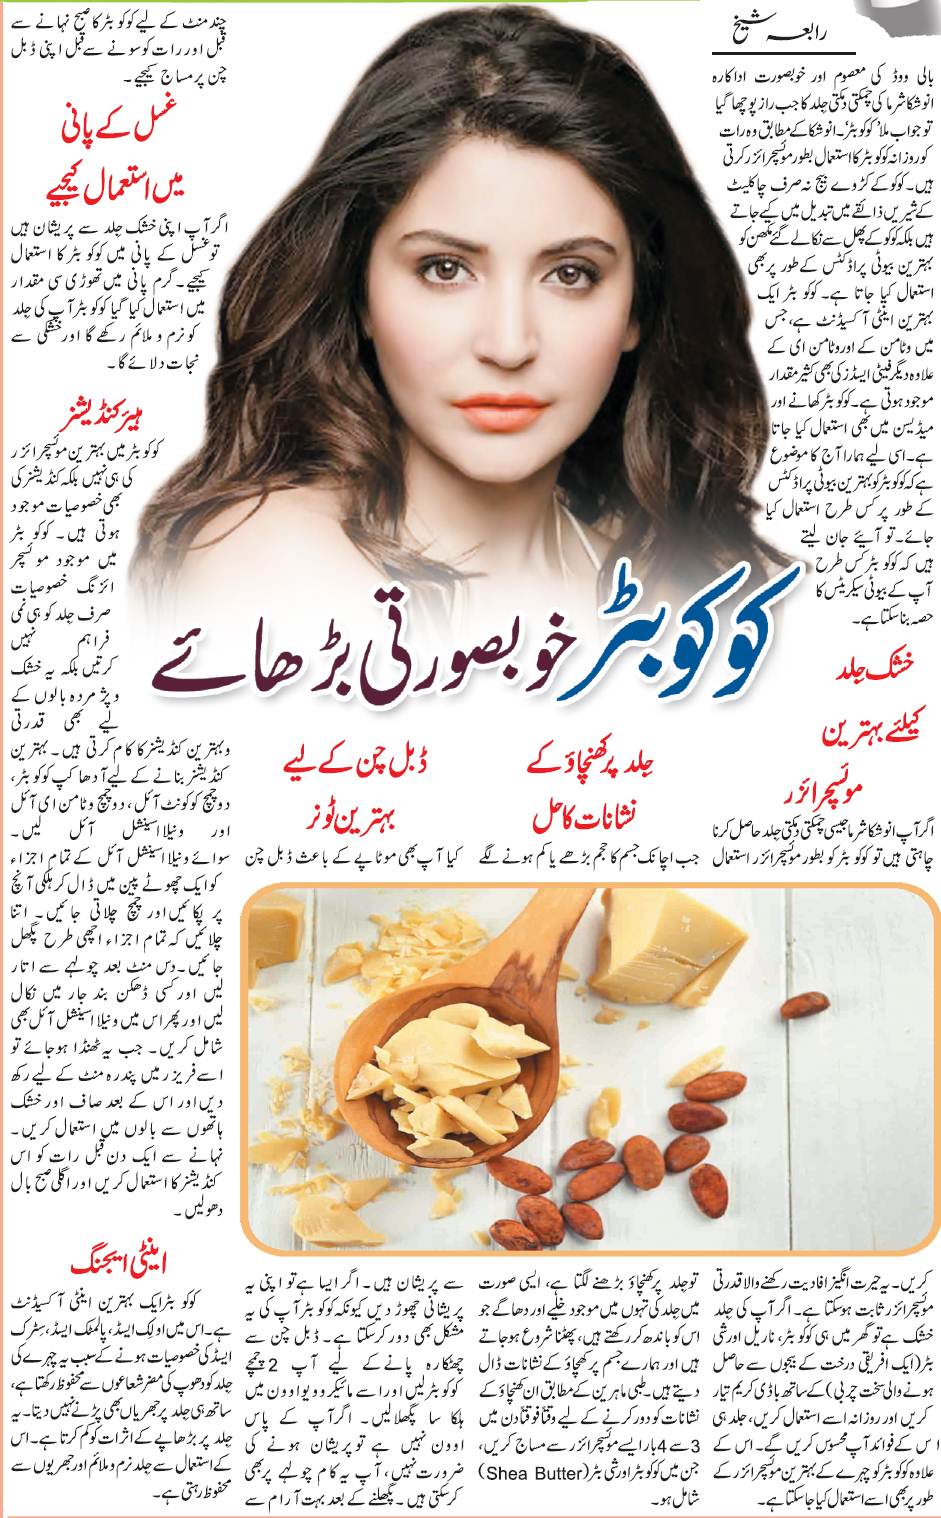 Cocoa Butter Uses, Products, Health & Beauty Benefits (Urdu & English)